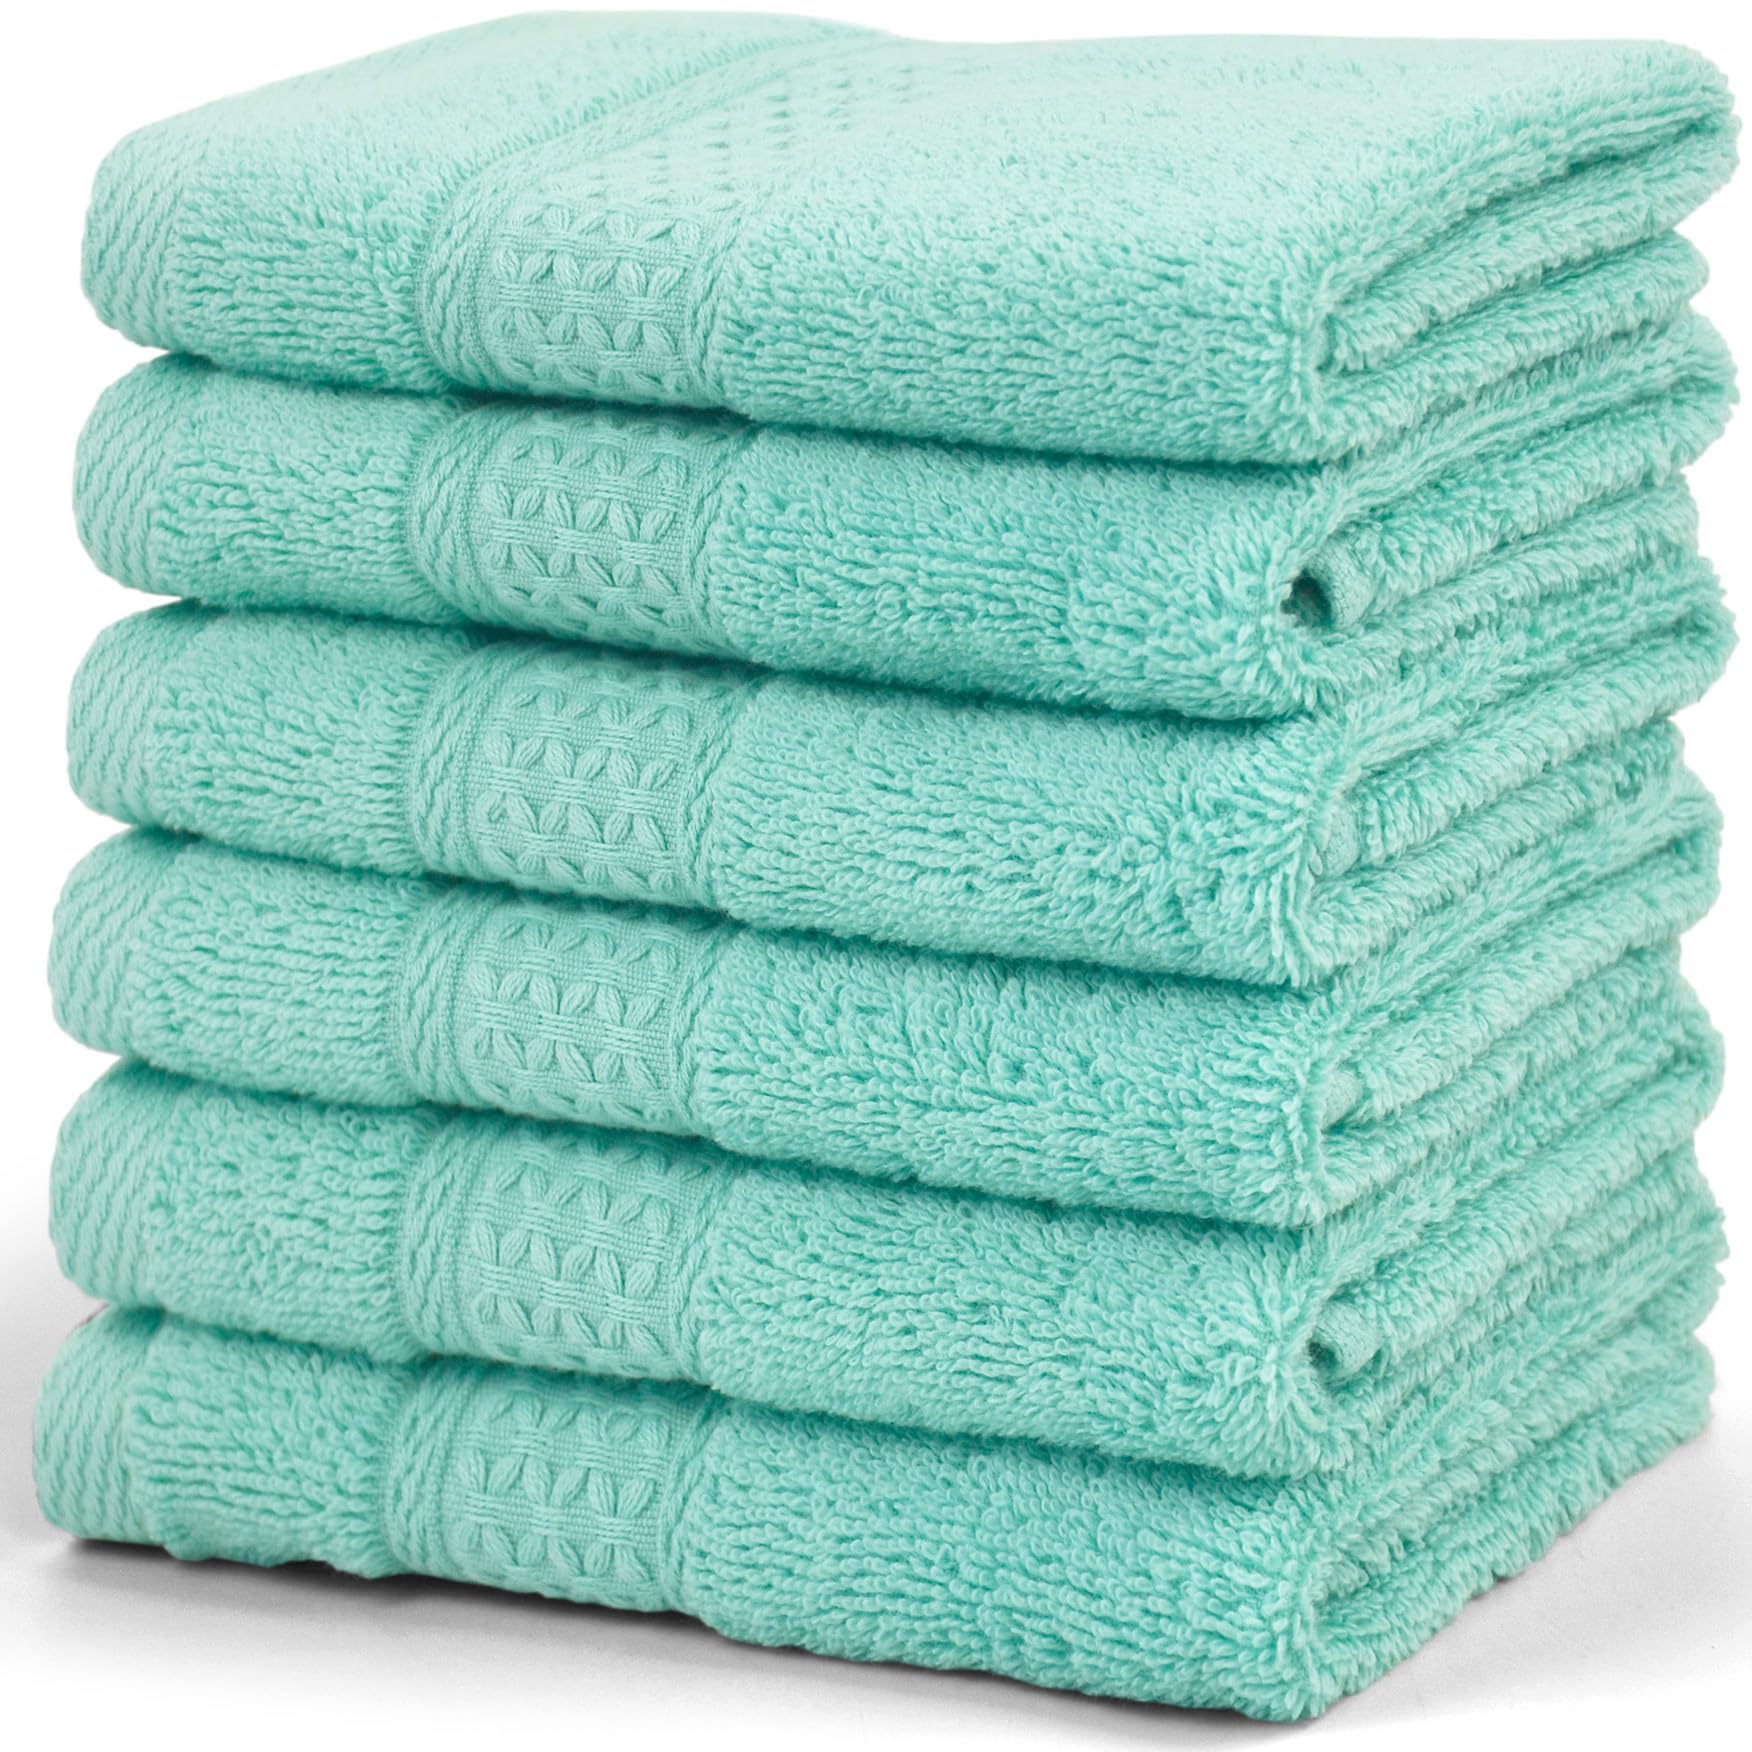 Cleanbear Washcloths for Your Body 100% Cotton Facecloths Extra Soft Bathroom Washcloths - 13 by 13 Inches (Teal)